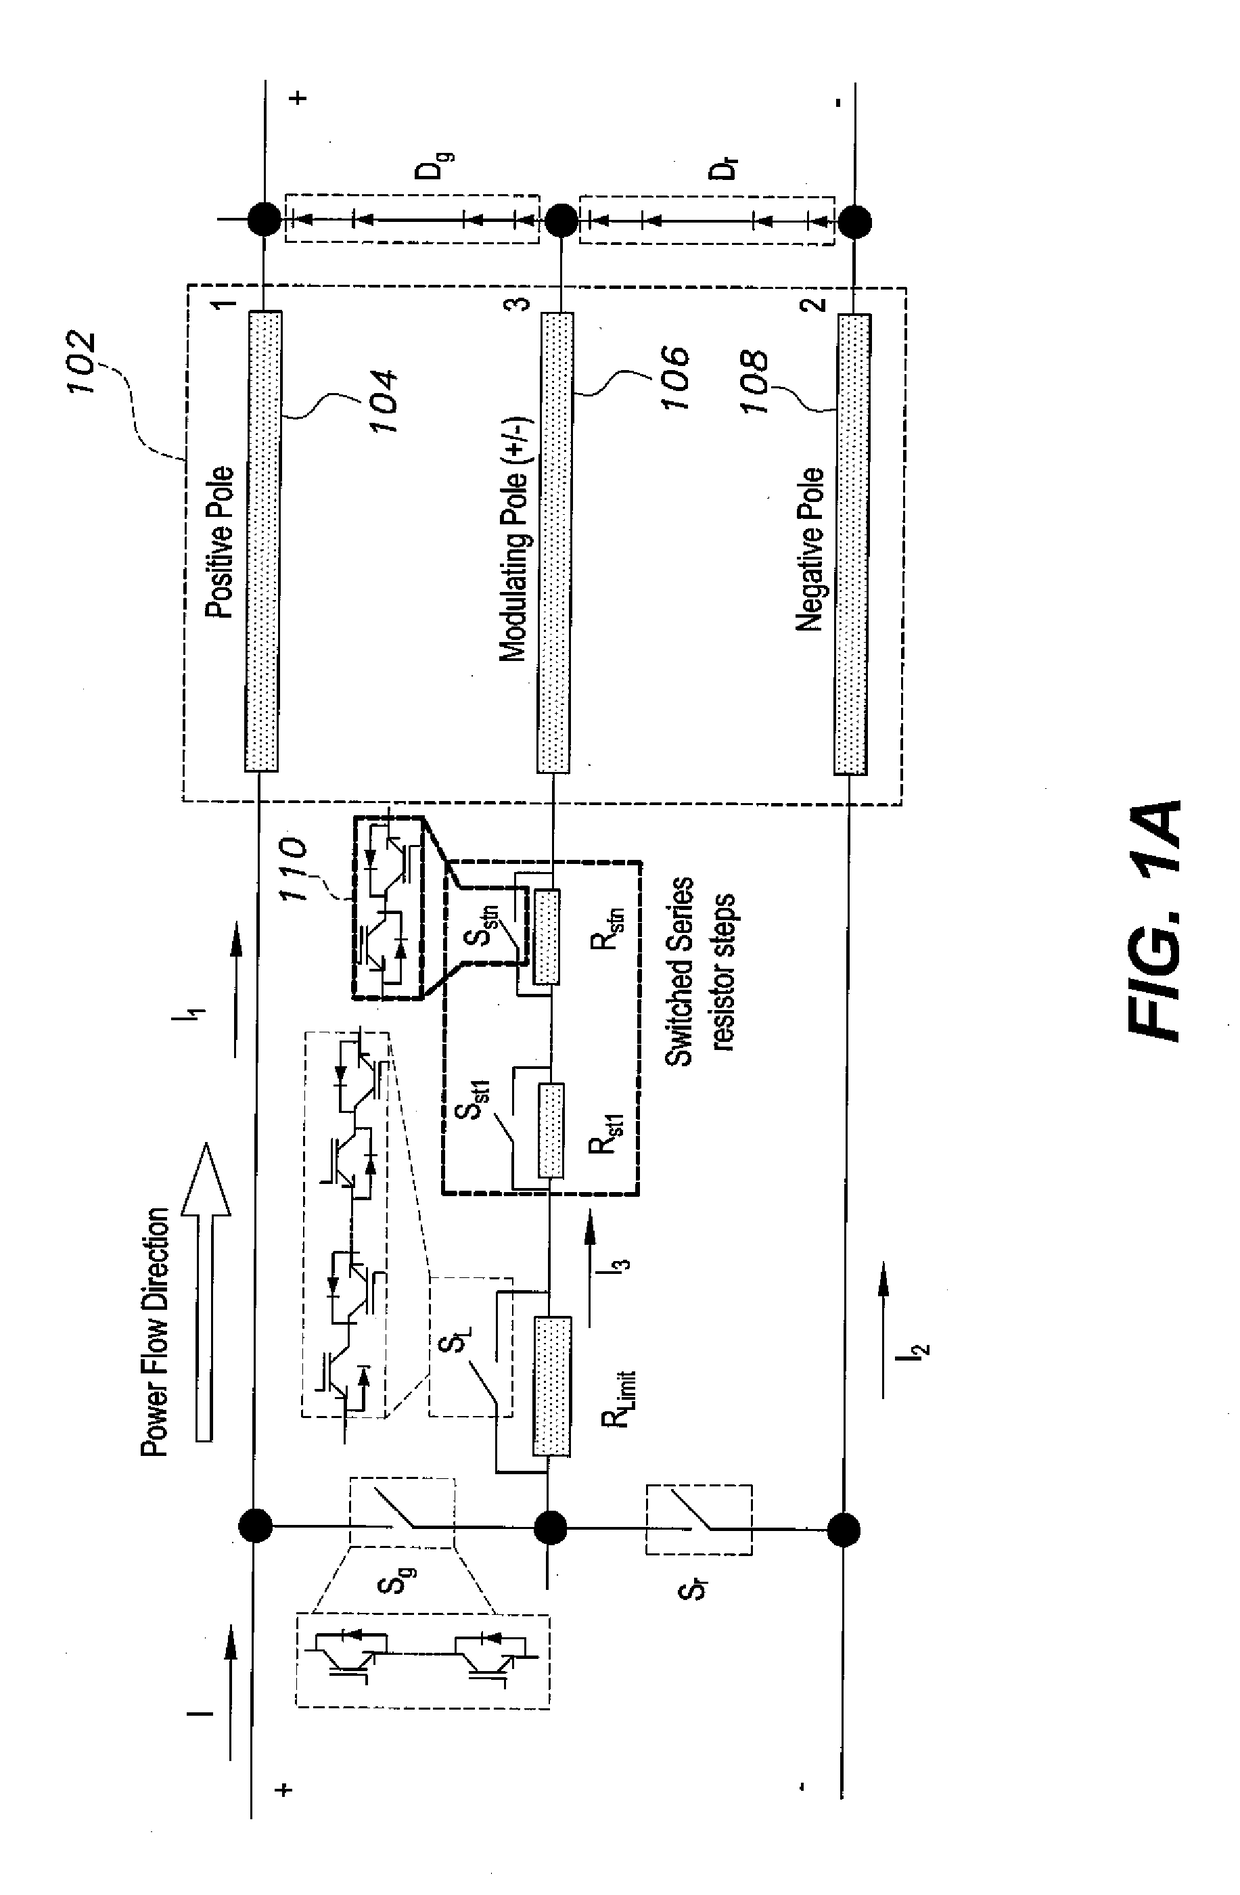 Method of converting high voltage ac lines into bipolar high voltage DC systems